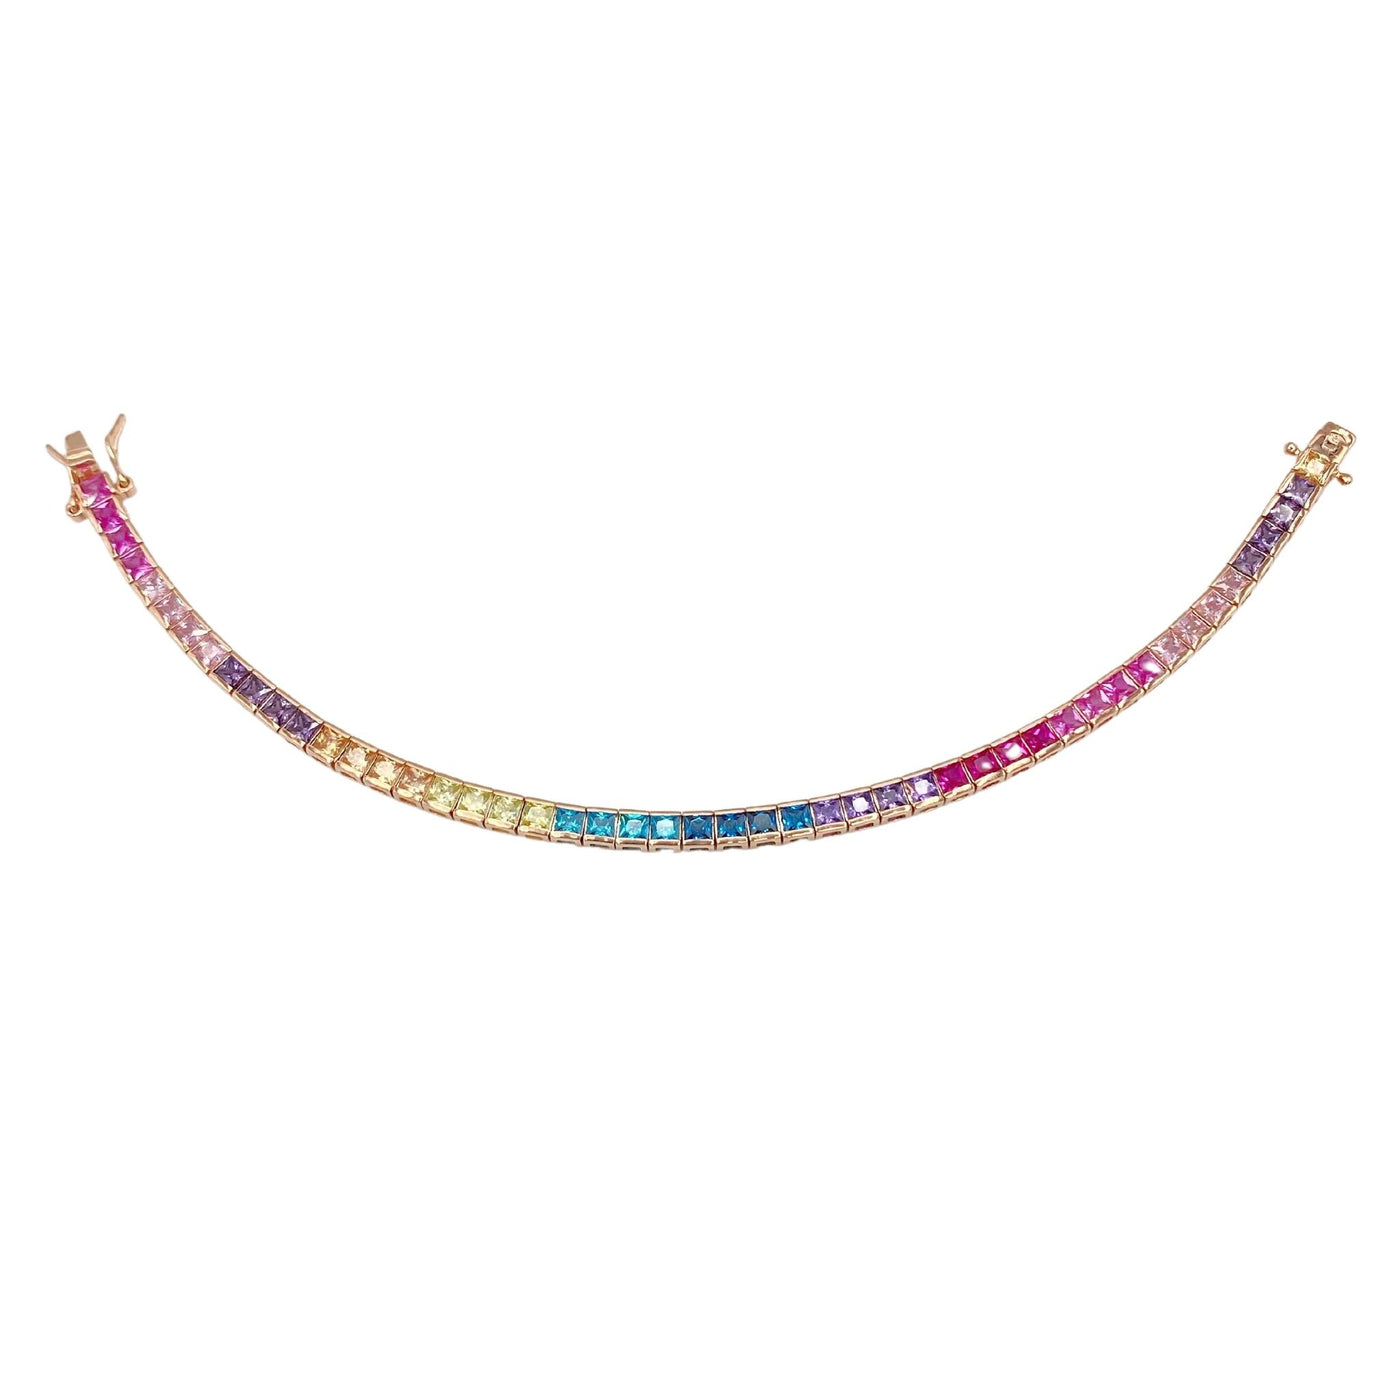 Silver casting tennis bracelet with rainbow square stones - rose